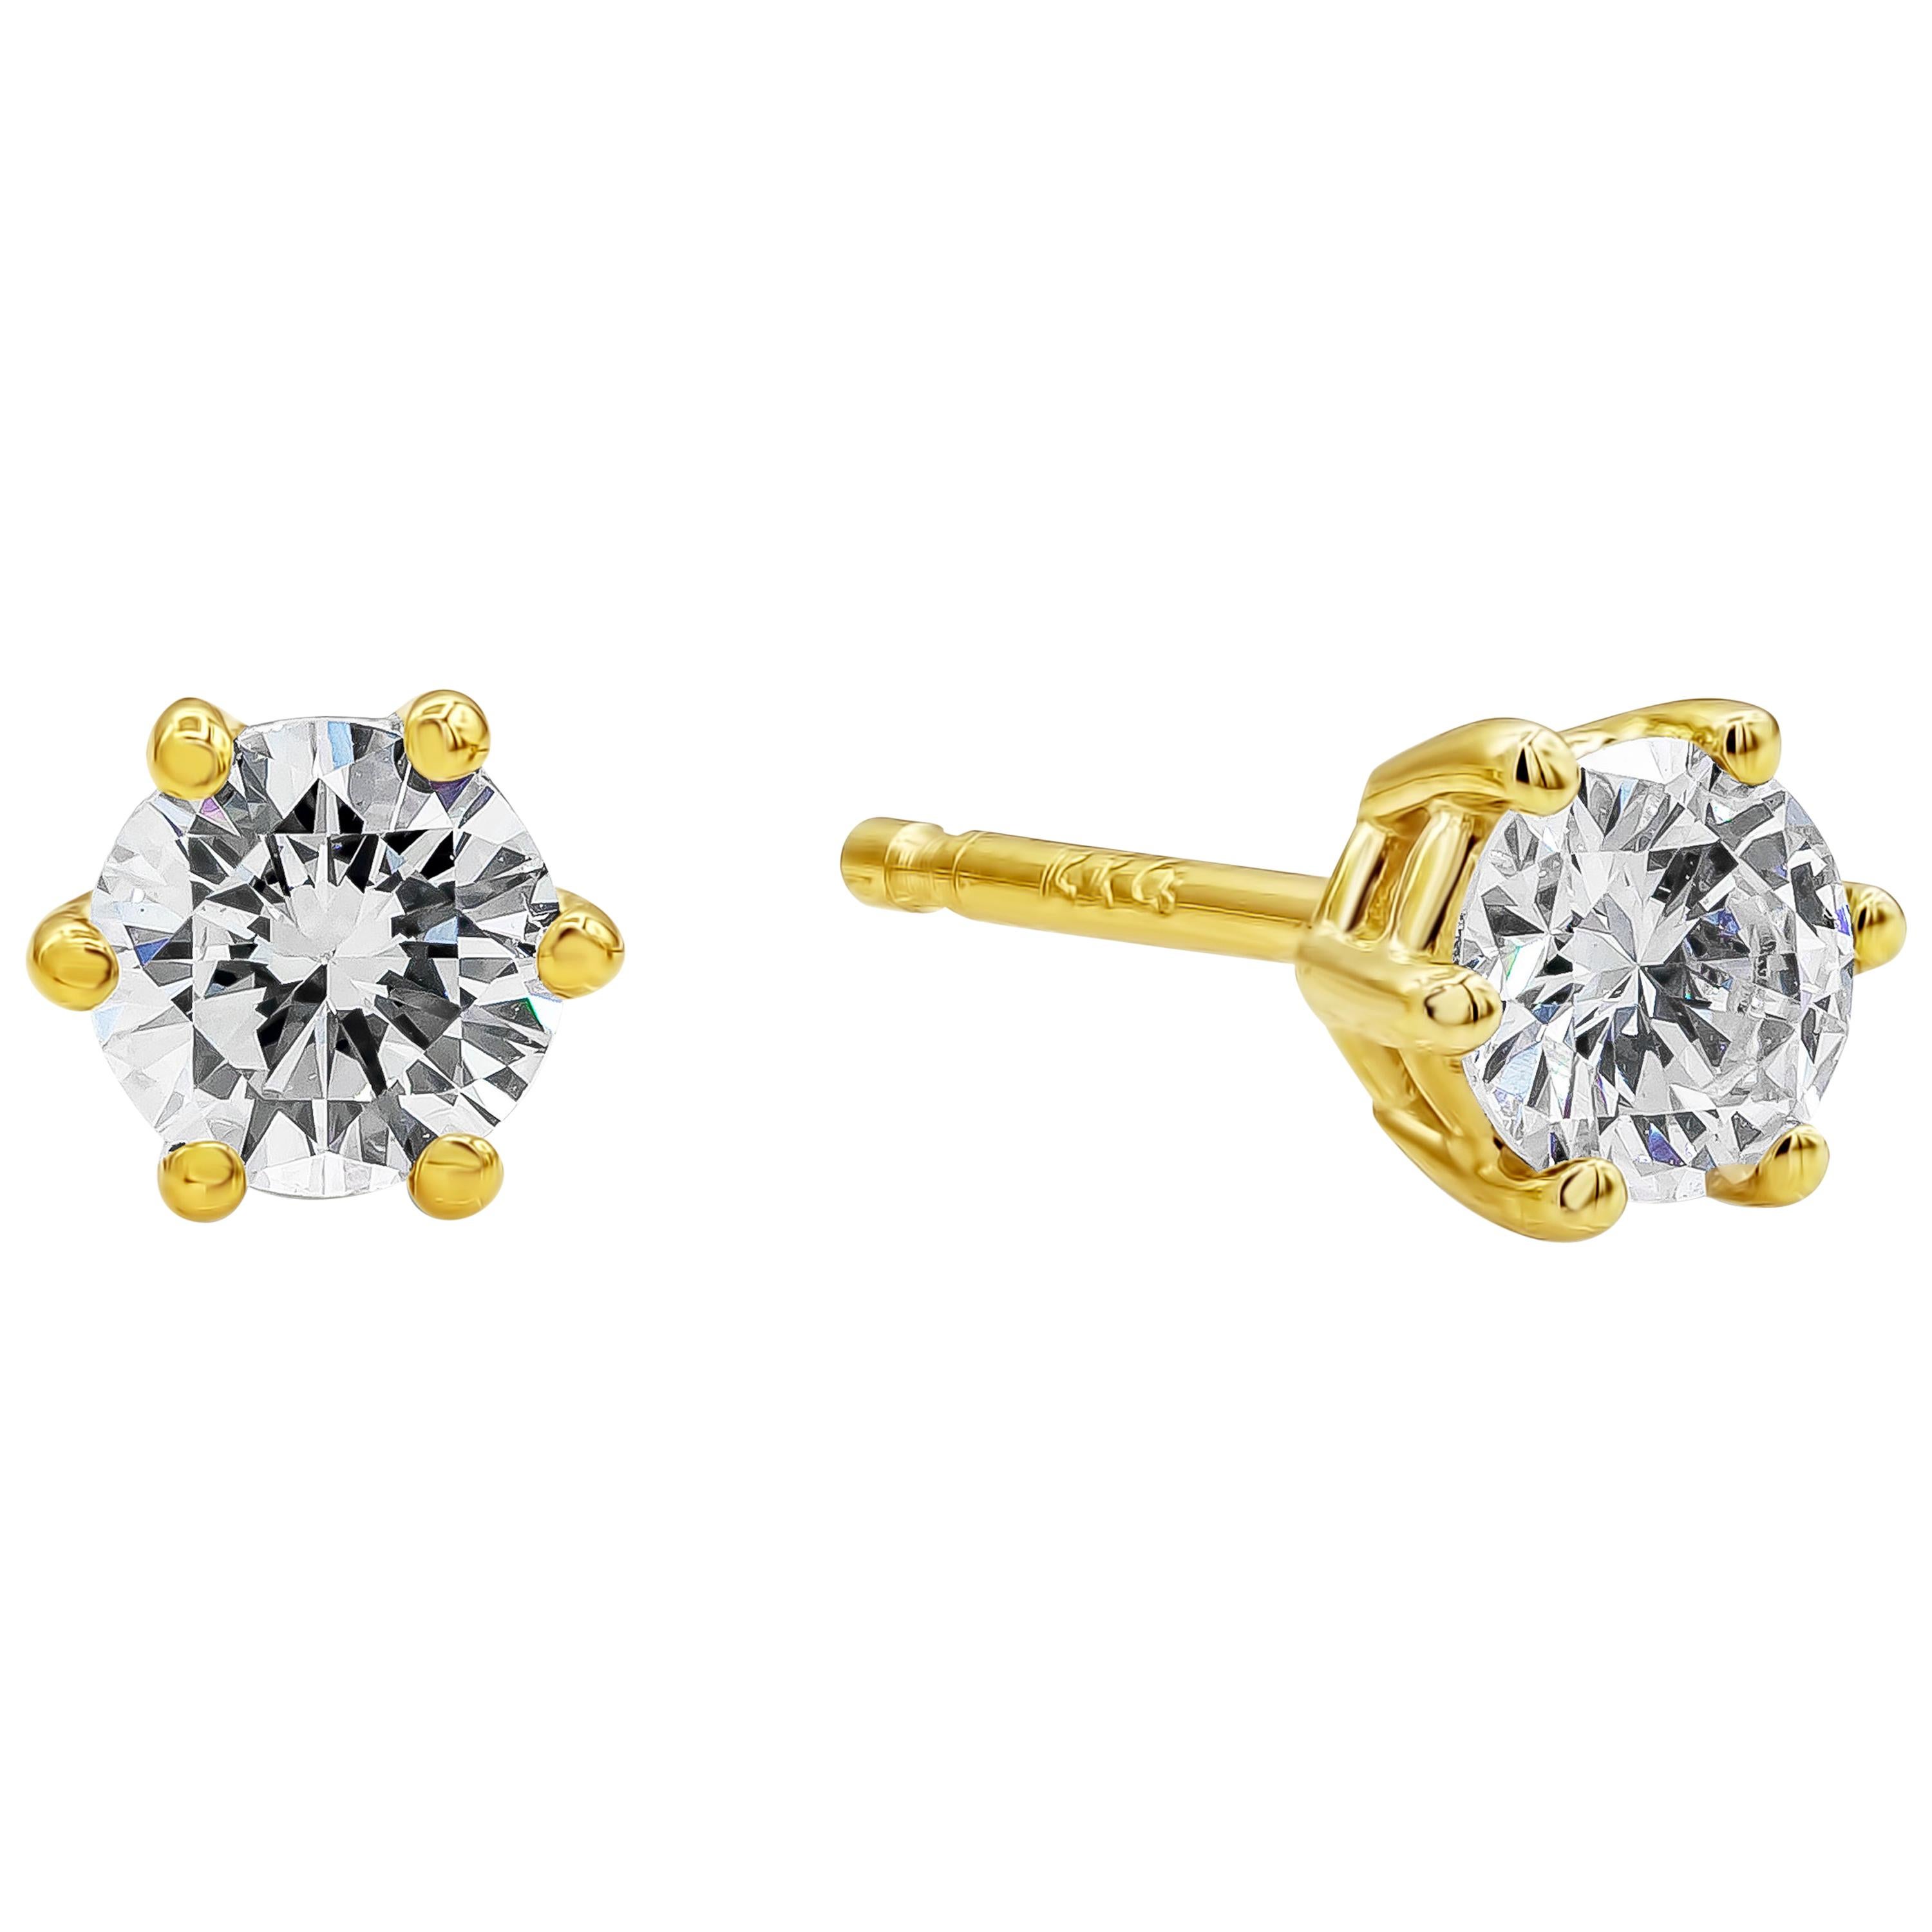 A timeless stud earring design to compliment any style. Showcasing 2 round brilliant diamonds weighing 0.39 carats, set in a 6 prong 14 karat yellow gold. H-I color VS clarity

Style available in different price ranges. Prices are based on your